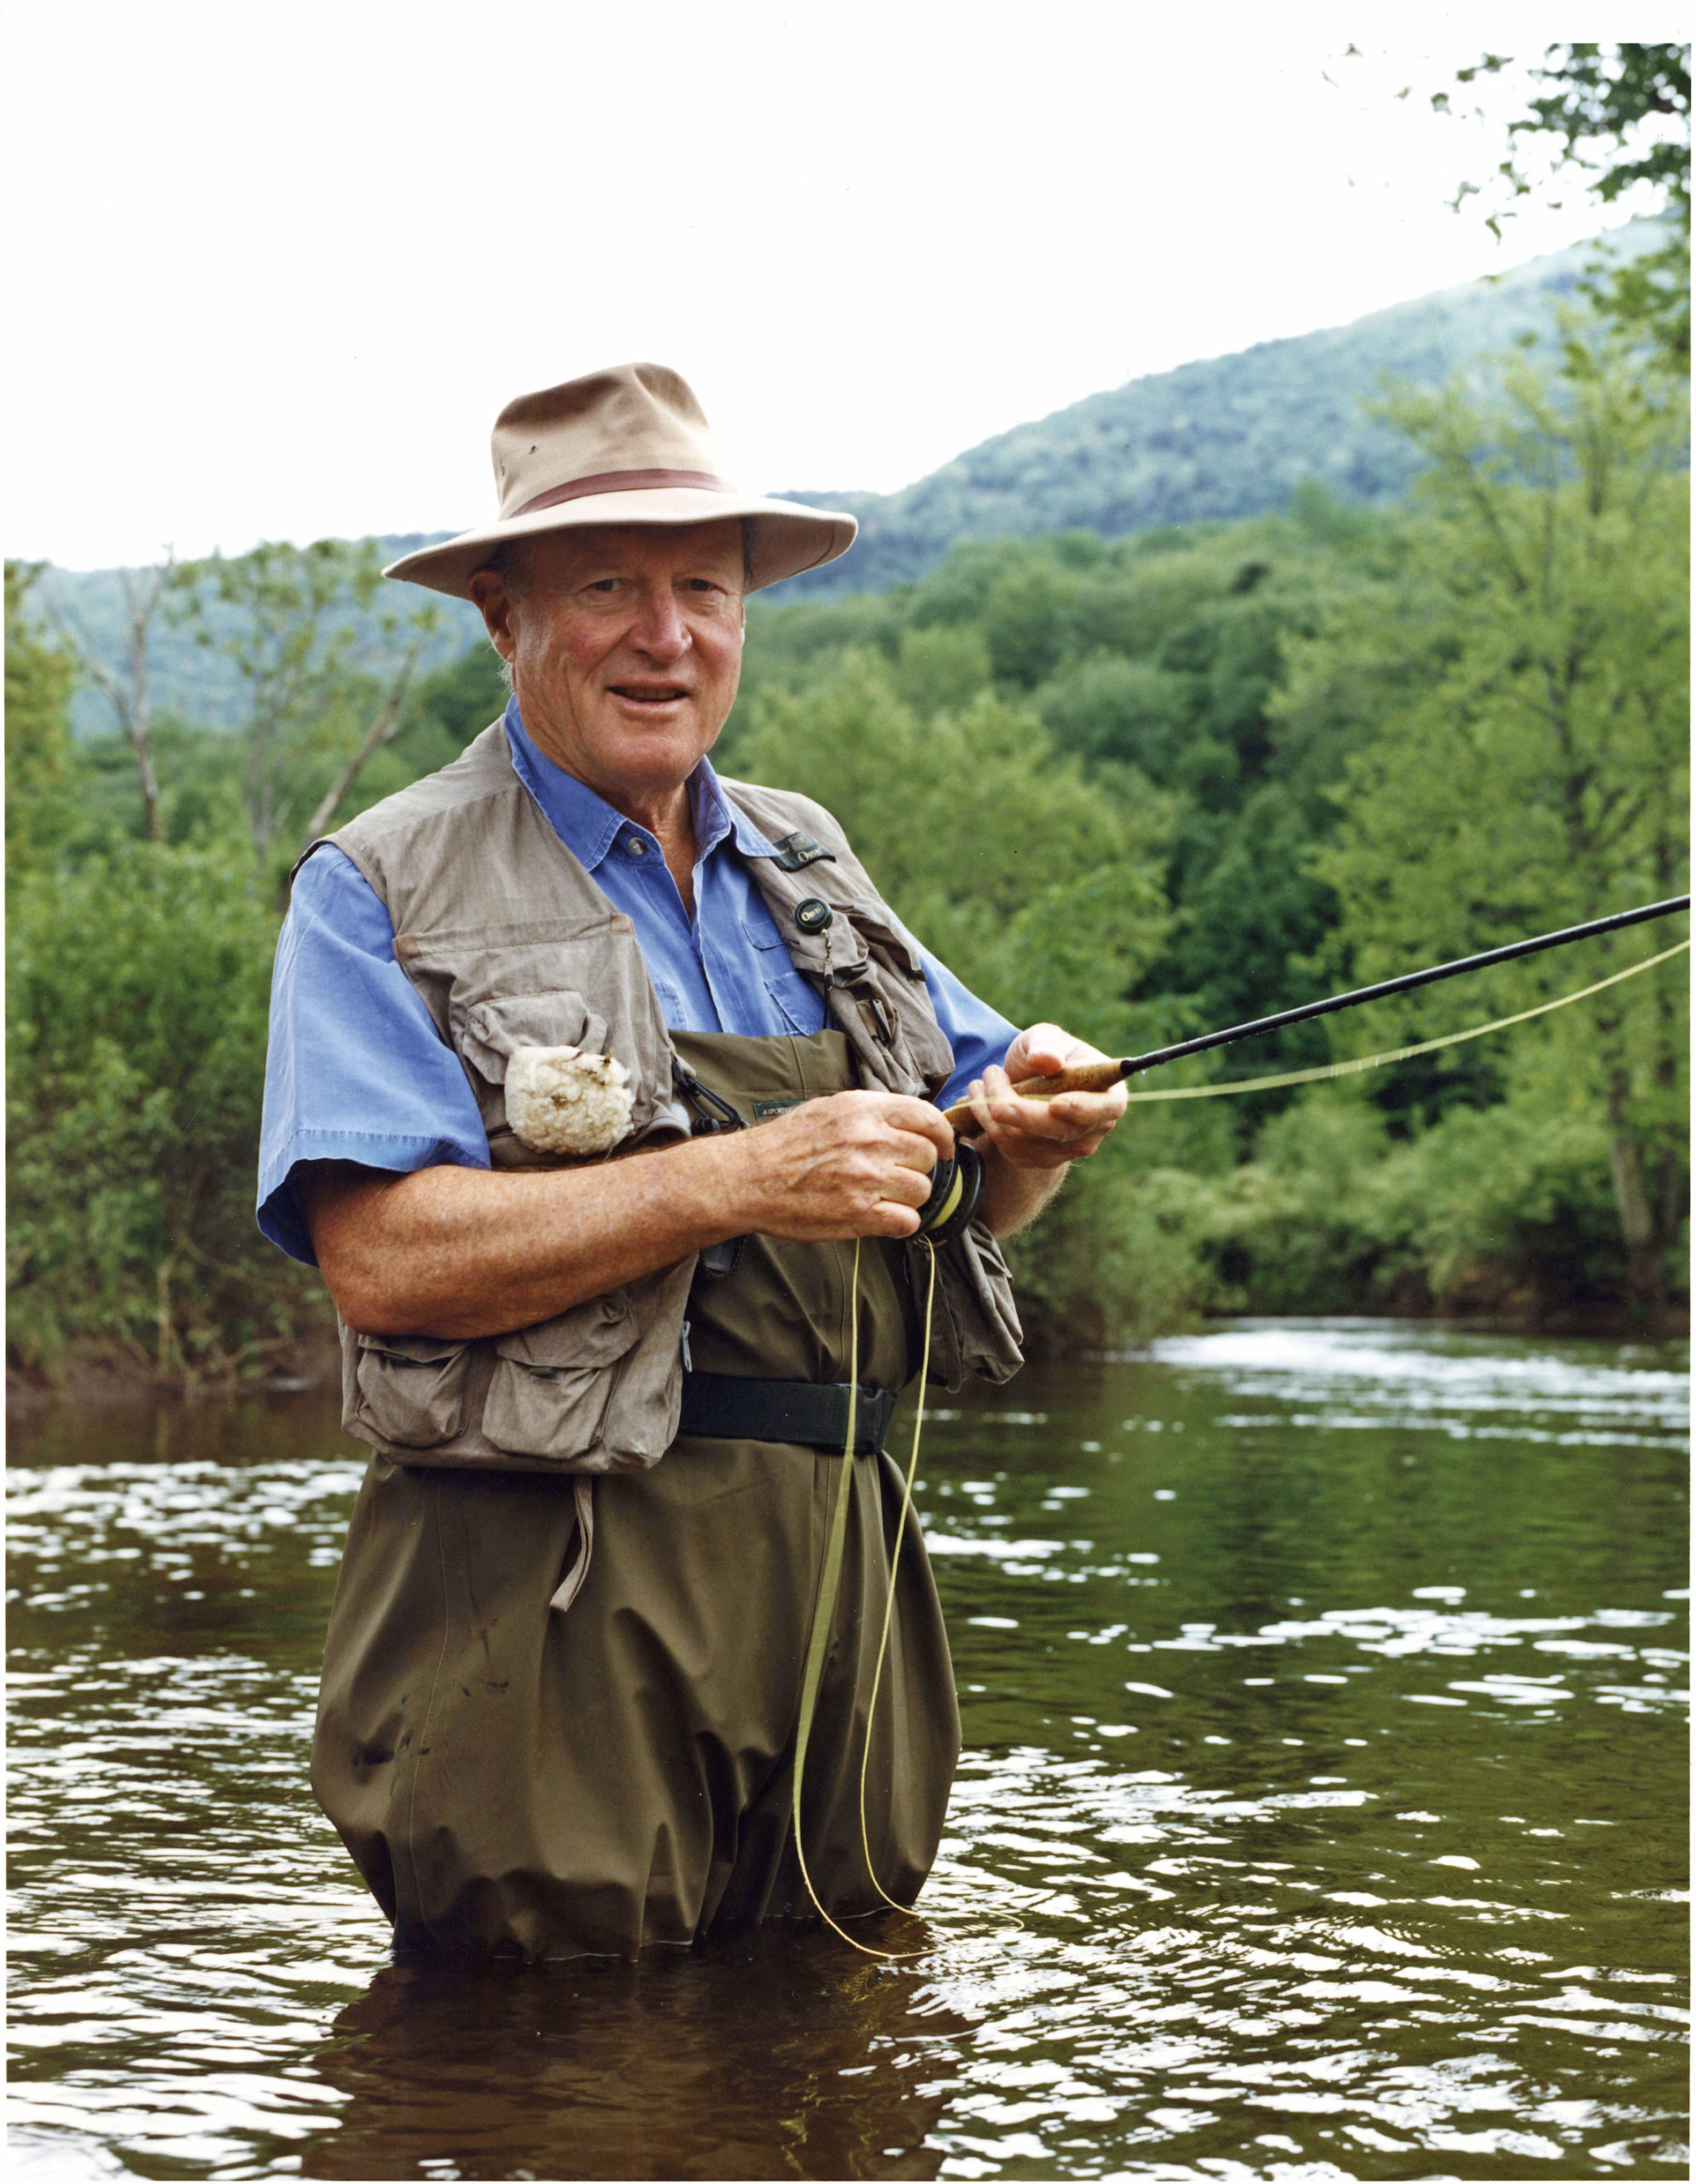 American Museum Of Fly Fishing - The Home Of Fly Fishing History